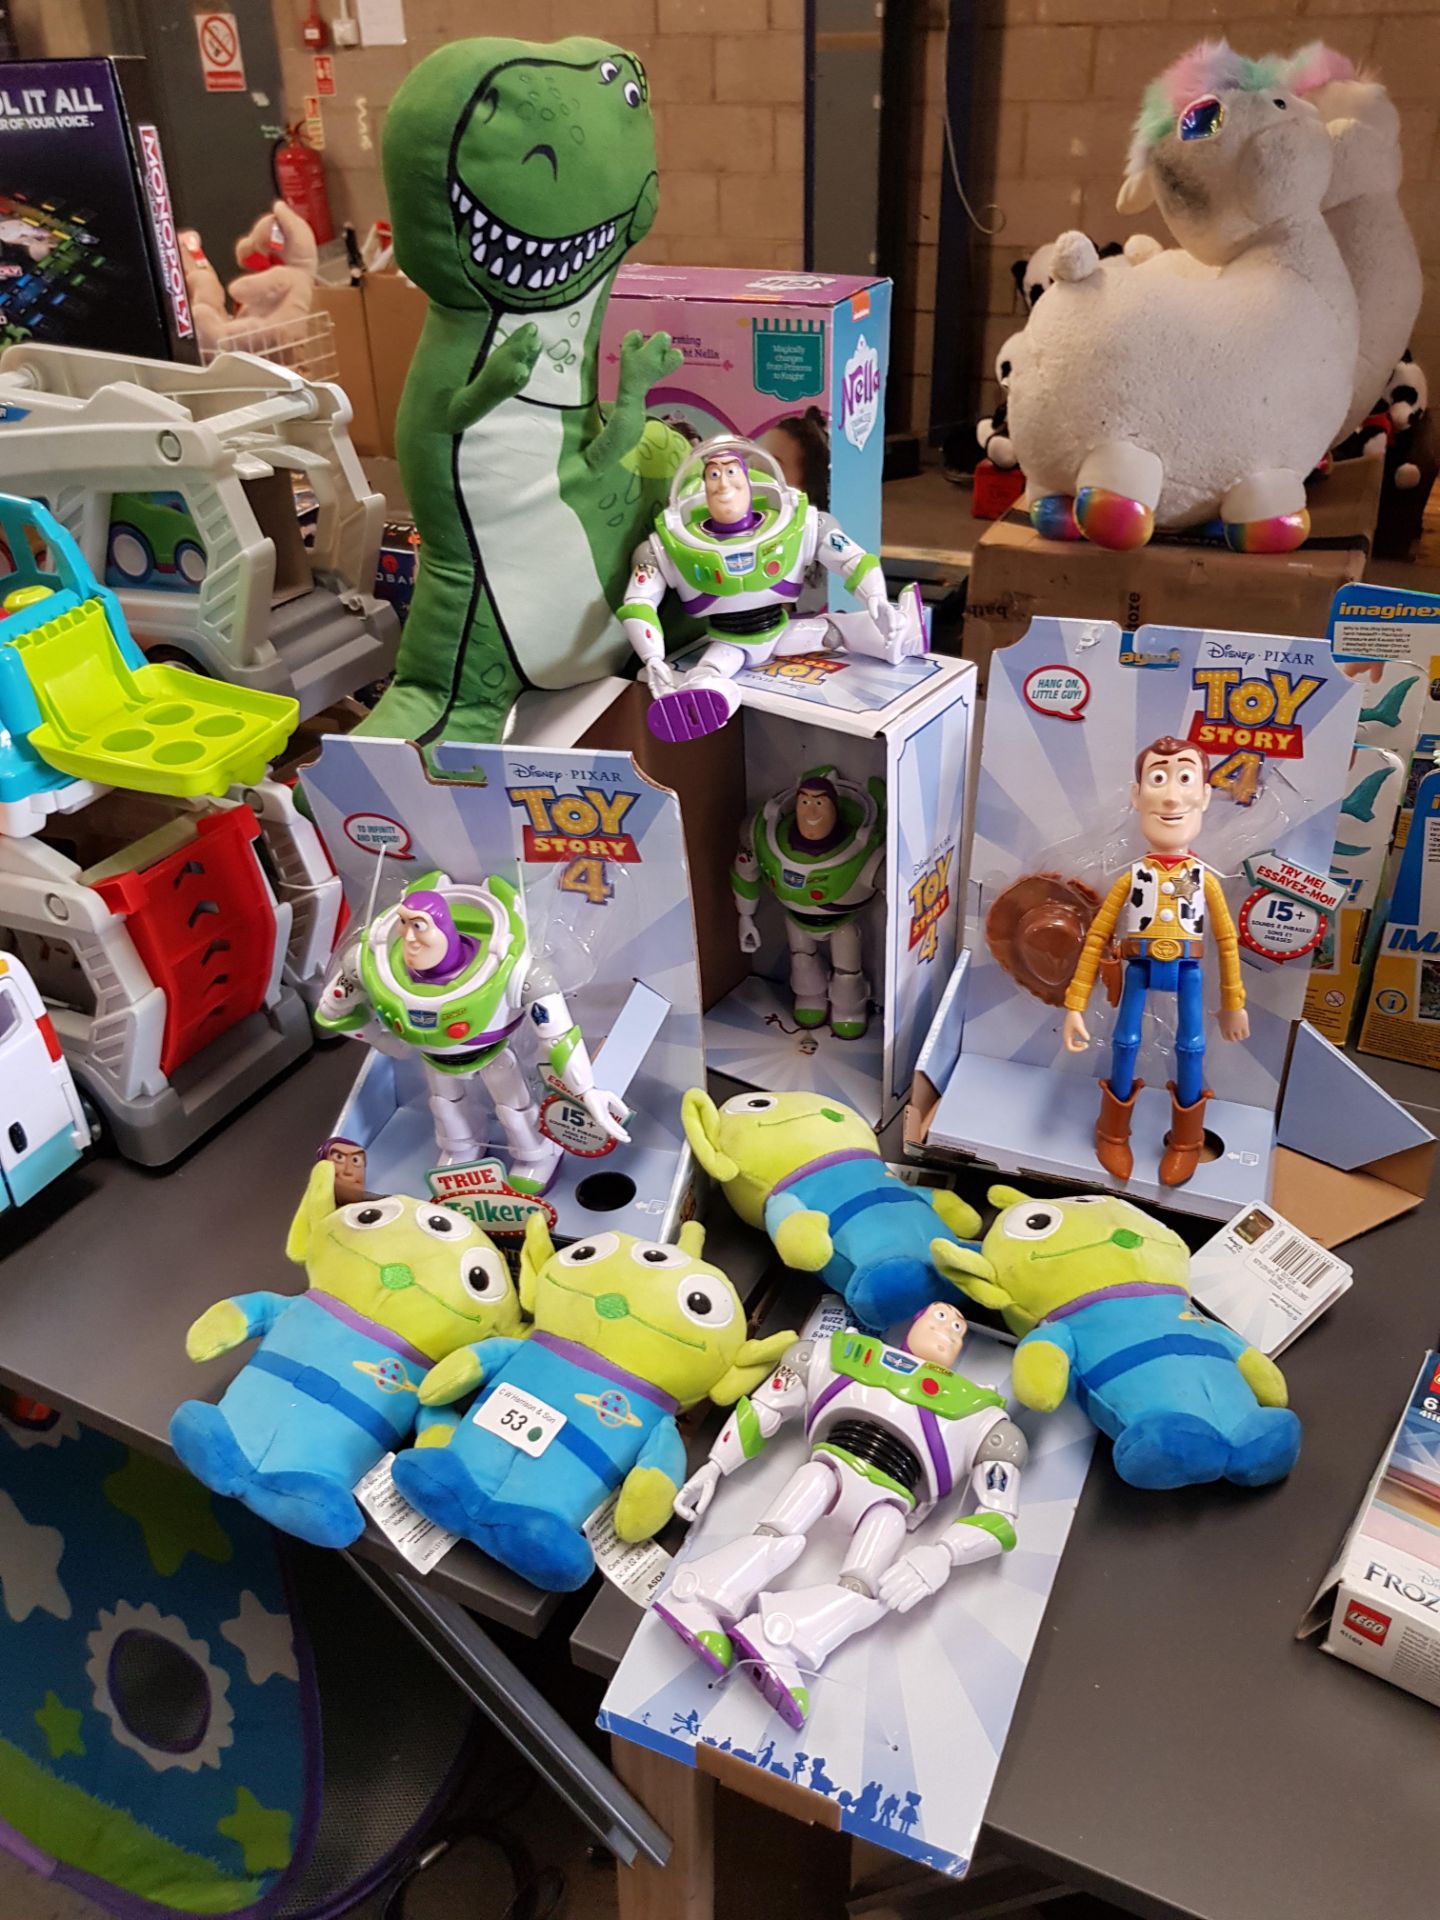 MIXED TOY STORY LOT - TO INC BUZZ LIGHTYEAR TRUE TALKERS & WOODY